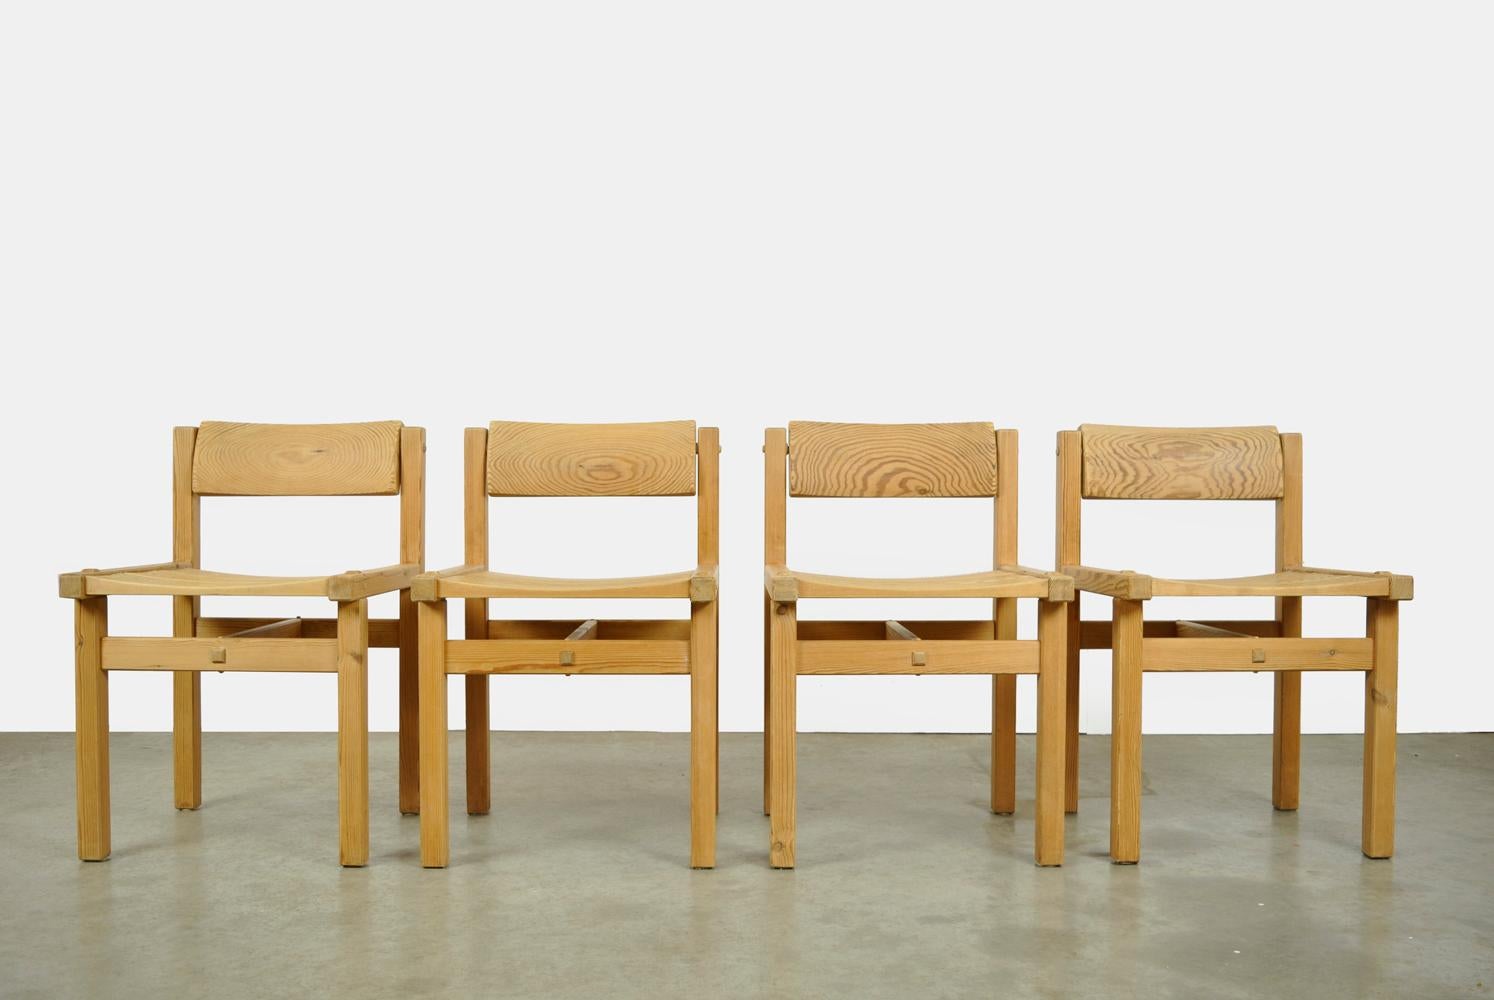 Scandinavian Modern Trybo pine dining chairs (4) by Edvin Helseth for Stange Bruk, Norway 1960s For Sale